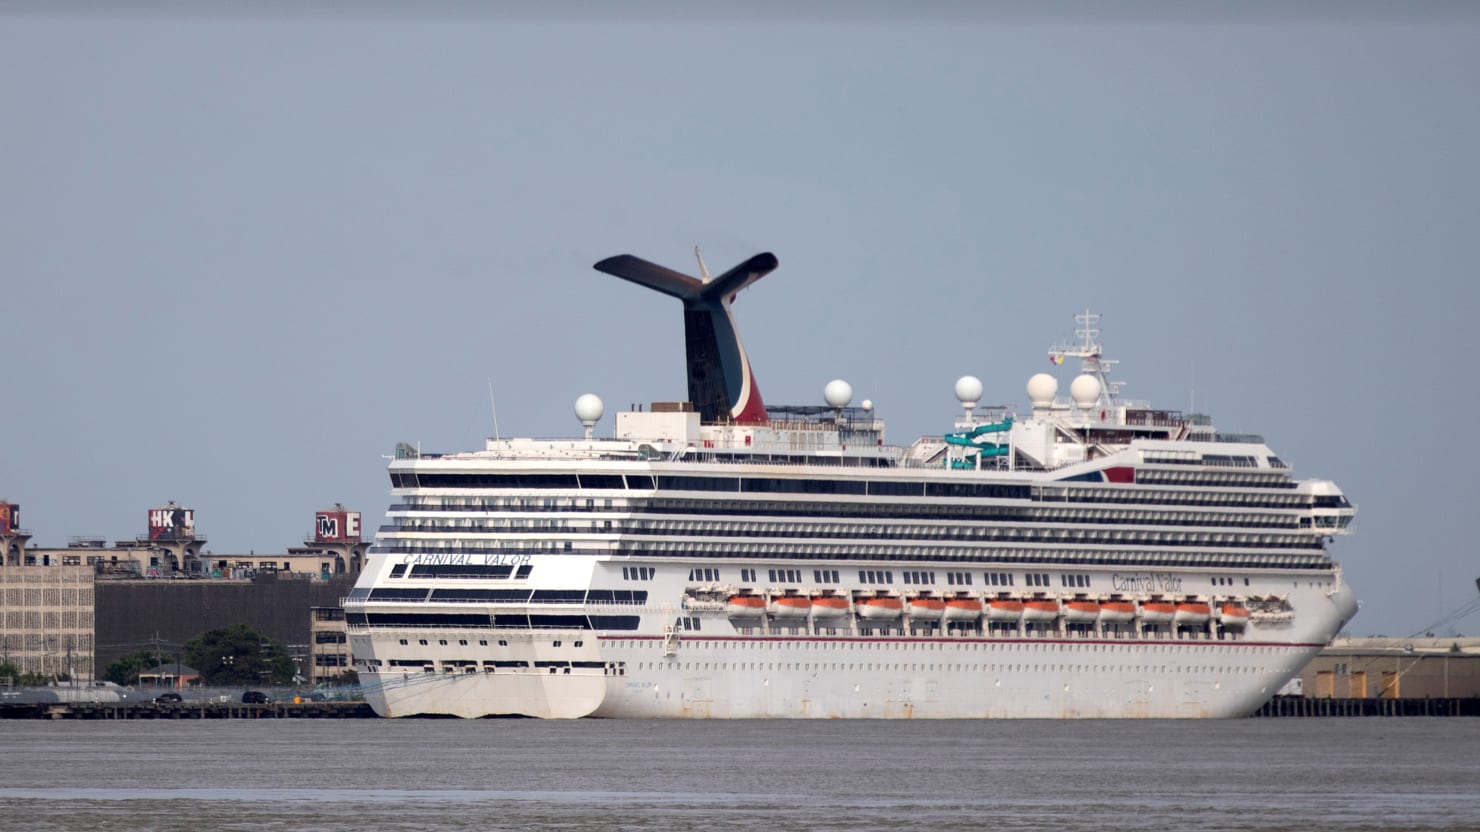 Cruise Passenger James Michael Grimes, Who Survived 20 Hours Overboard, Can't Remember Falling